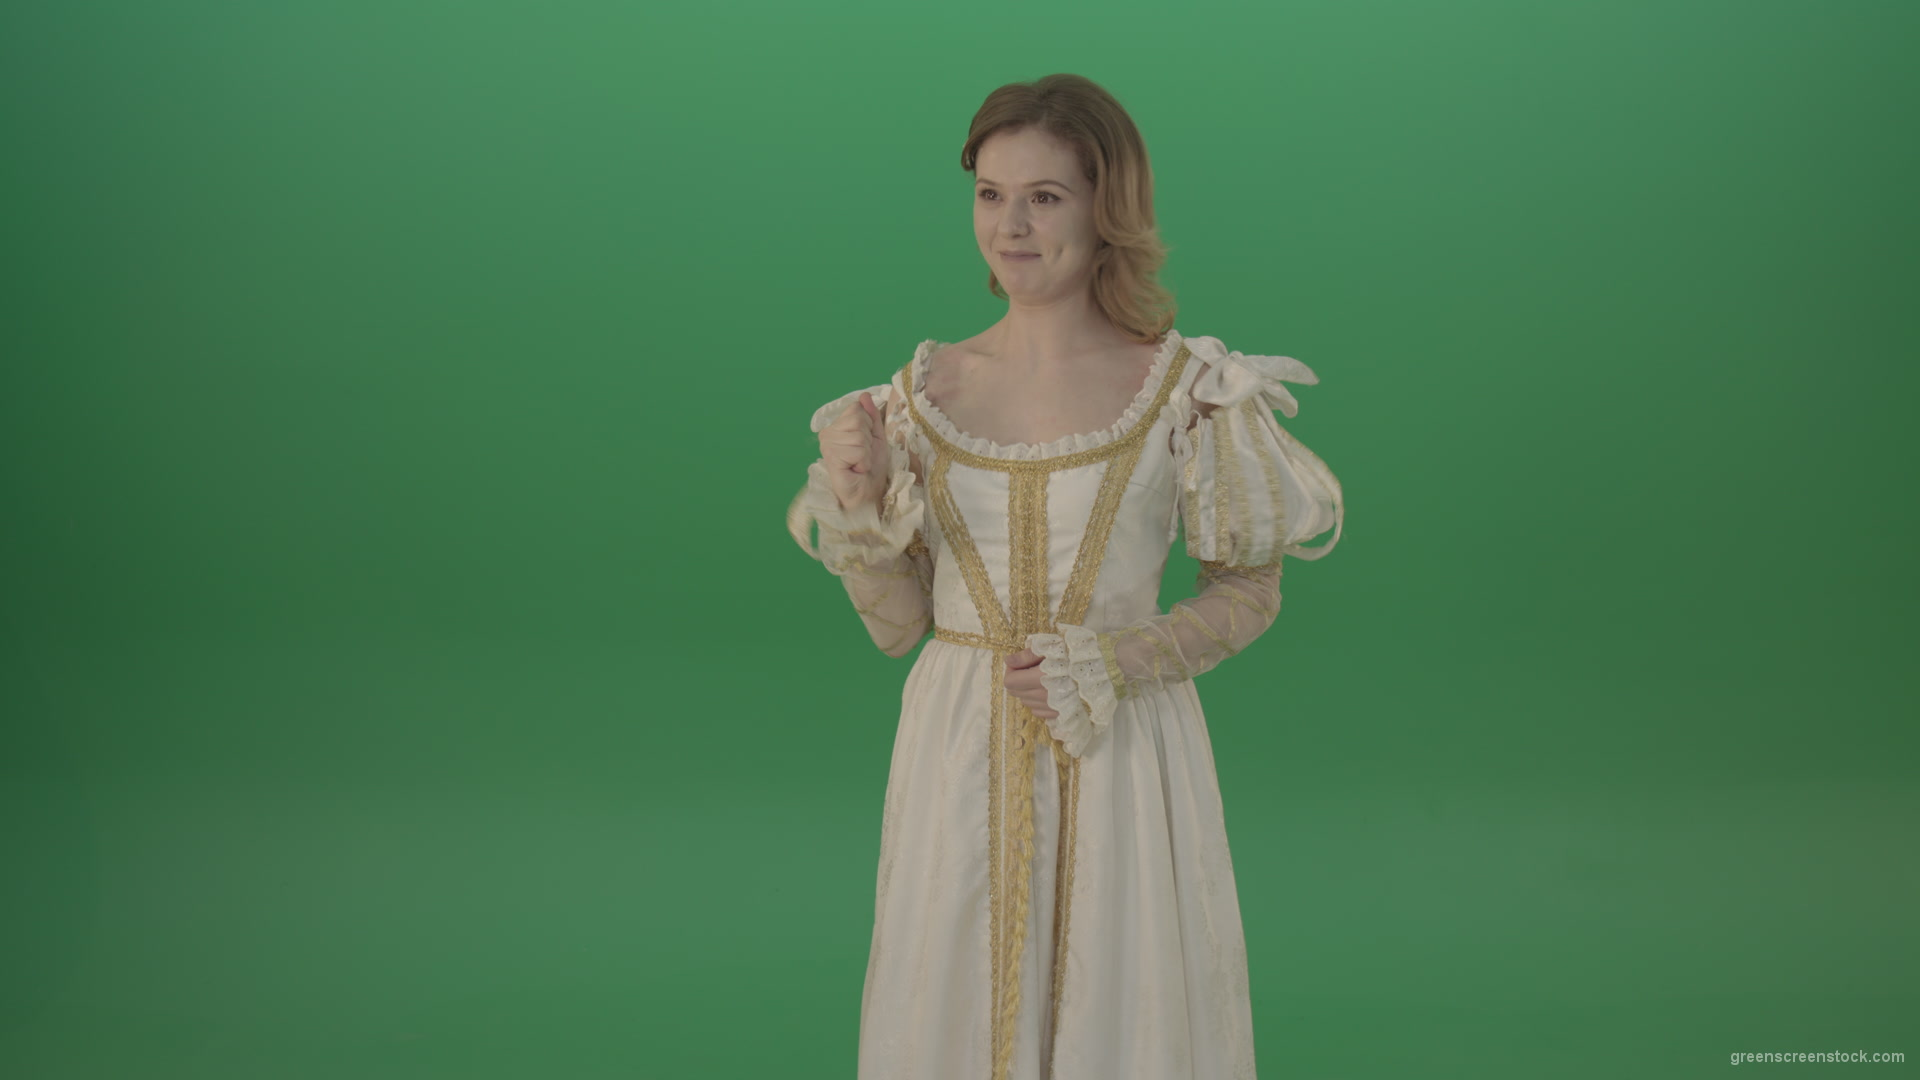 Flipping-a-virtual-reality-screen-the-girl-gladly-looks-at-the-photo-isolated-on-green-screen_008 Green Screen Stock